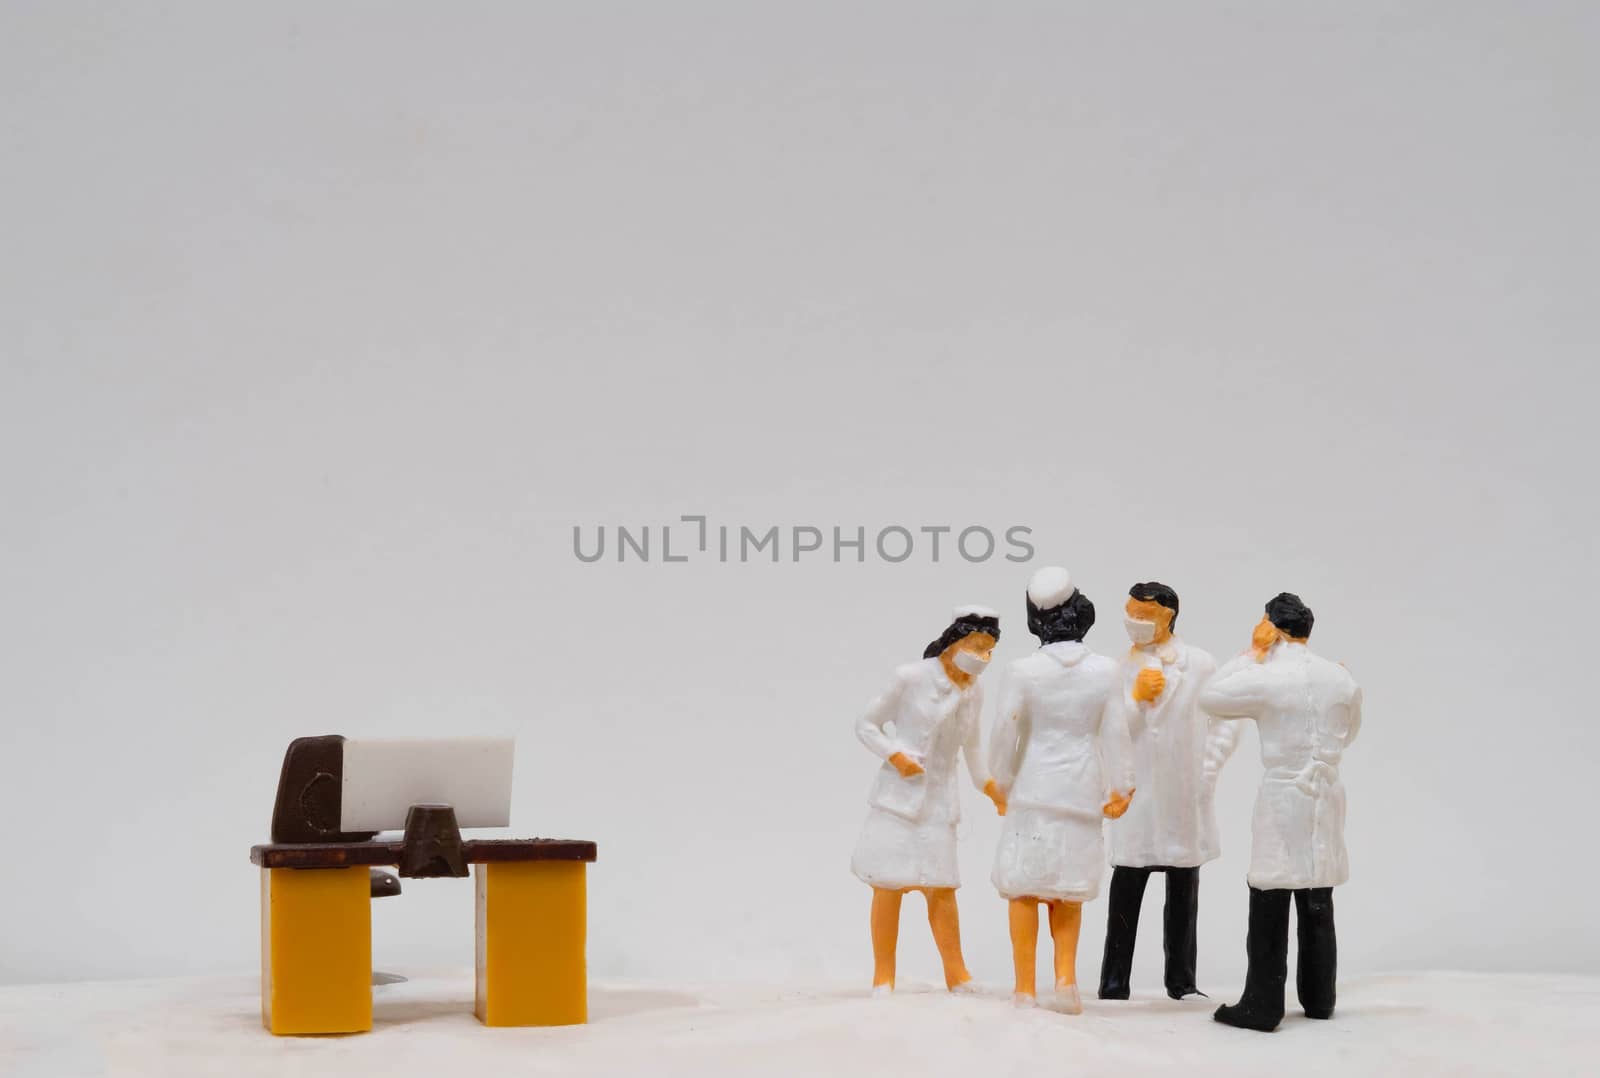 Miniature figure doll Group of Doctor Nurse and Patient wearing  by Bonn2210